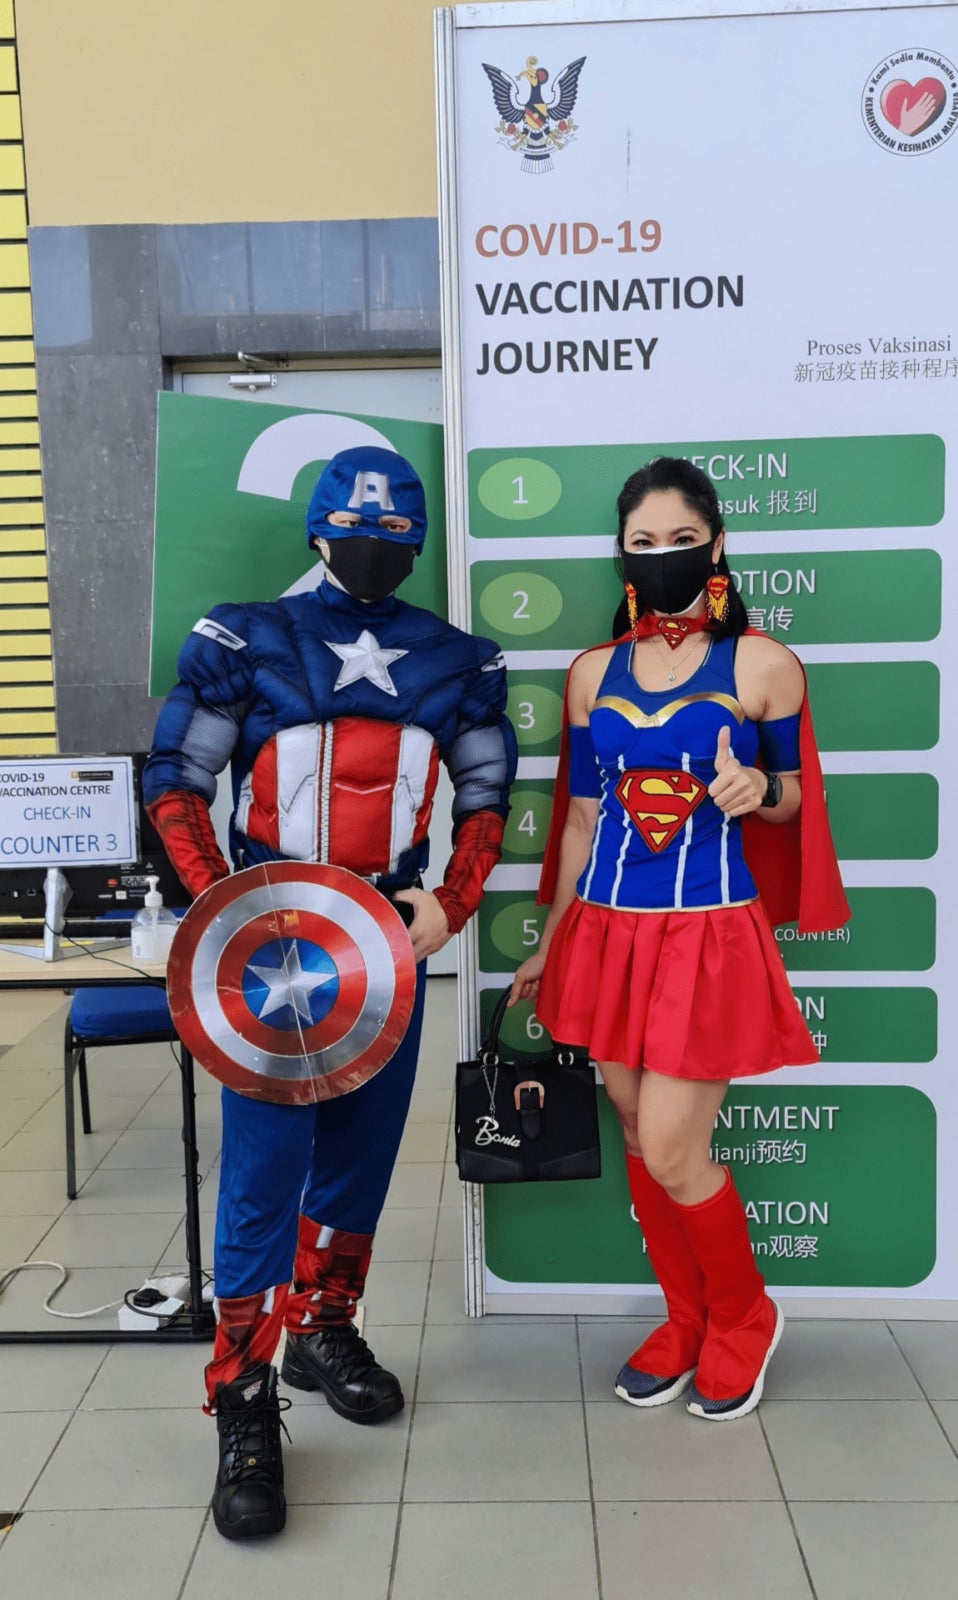 Malaysians wear costumes to vaccination10 min